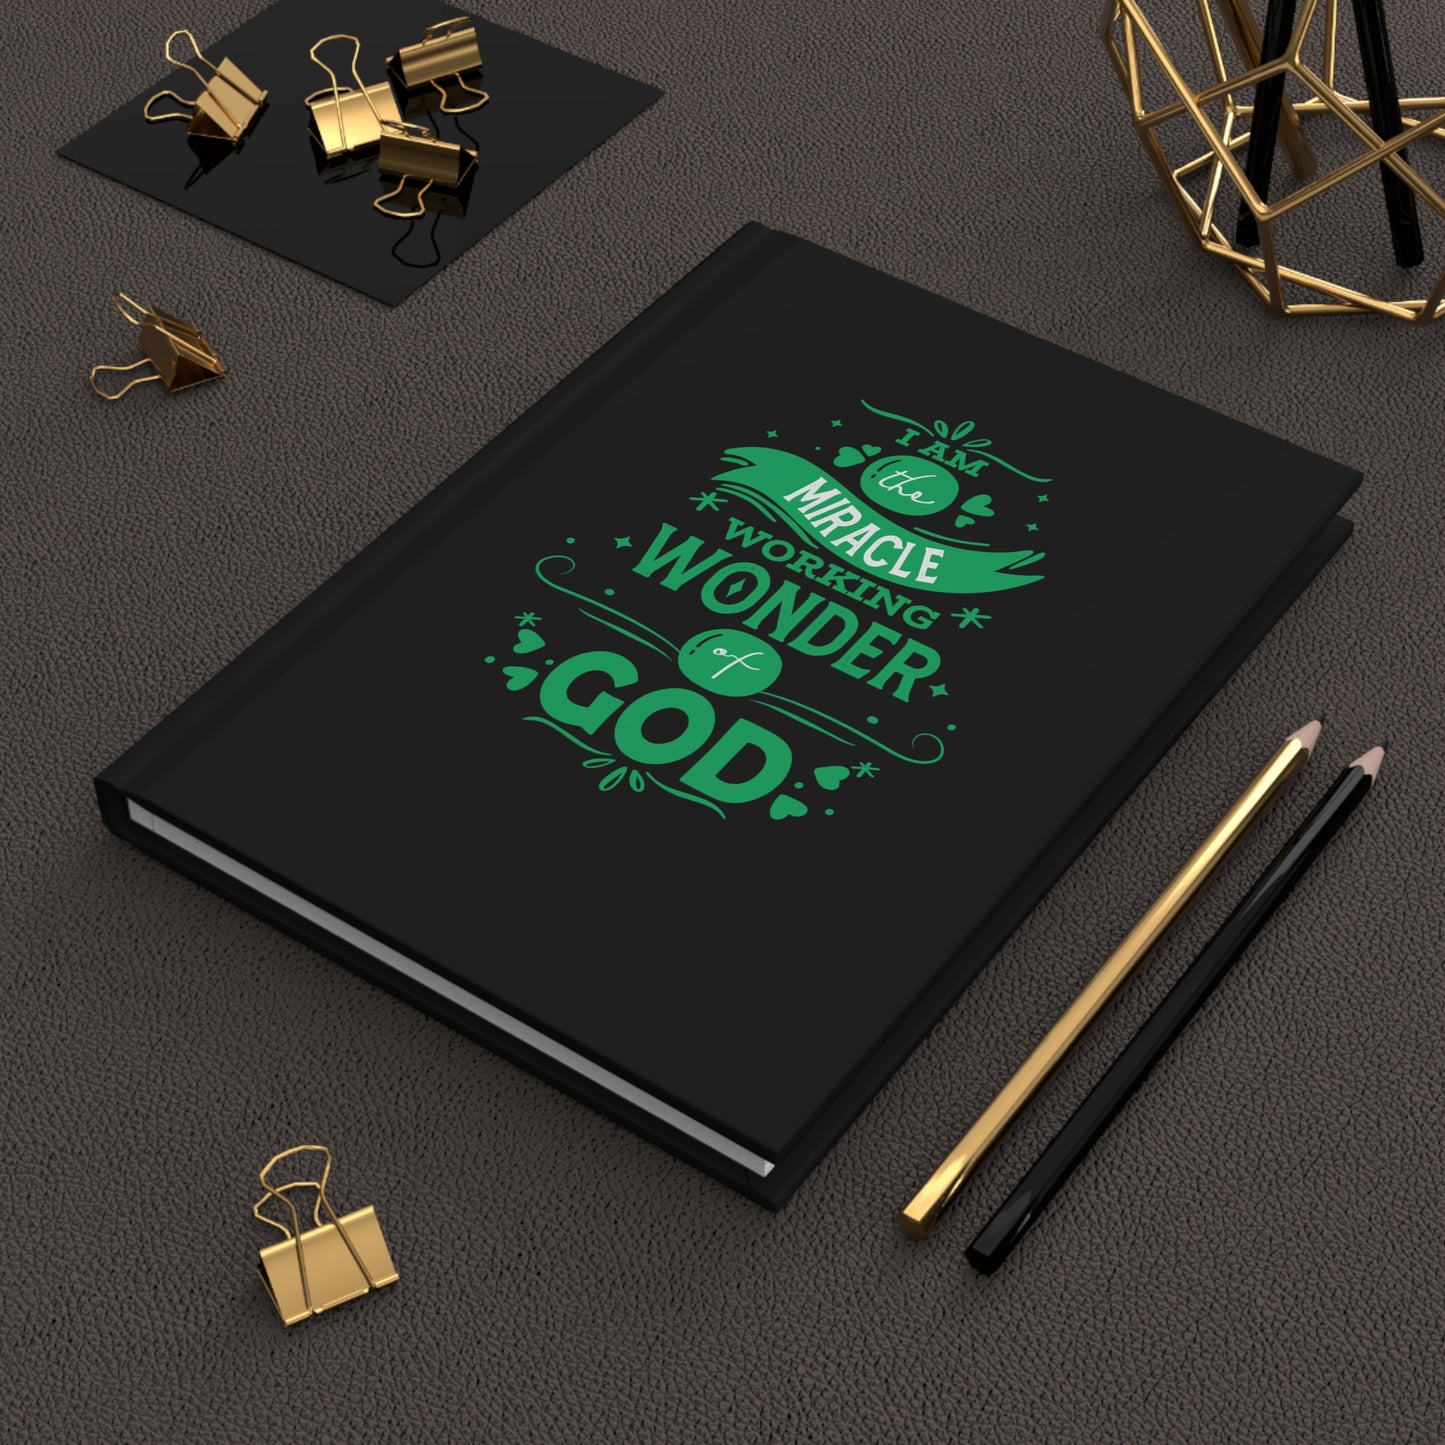 I Am The Miracle Working Wonder Of God Hardcover Journal Matte